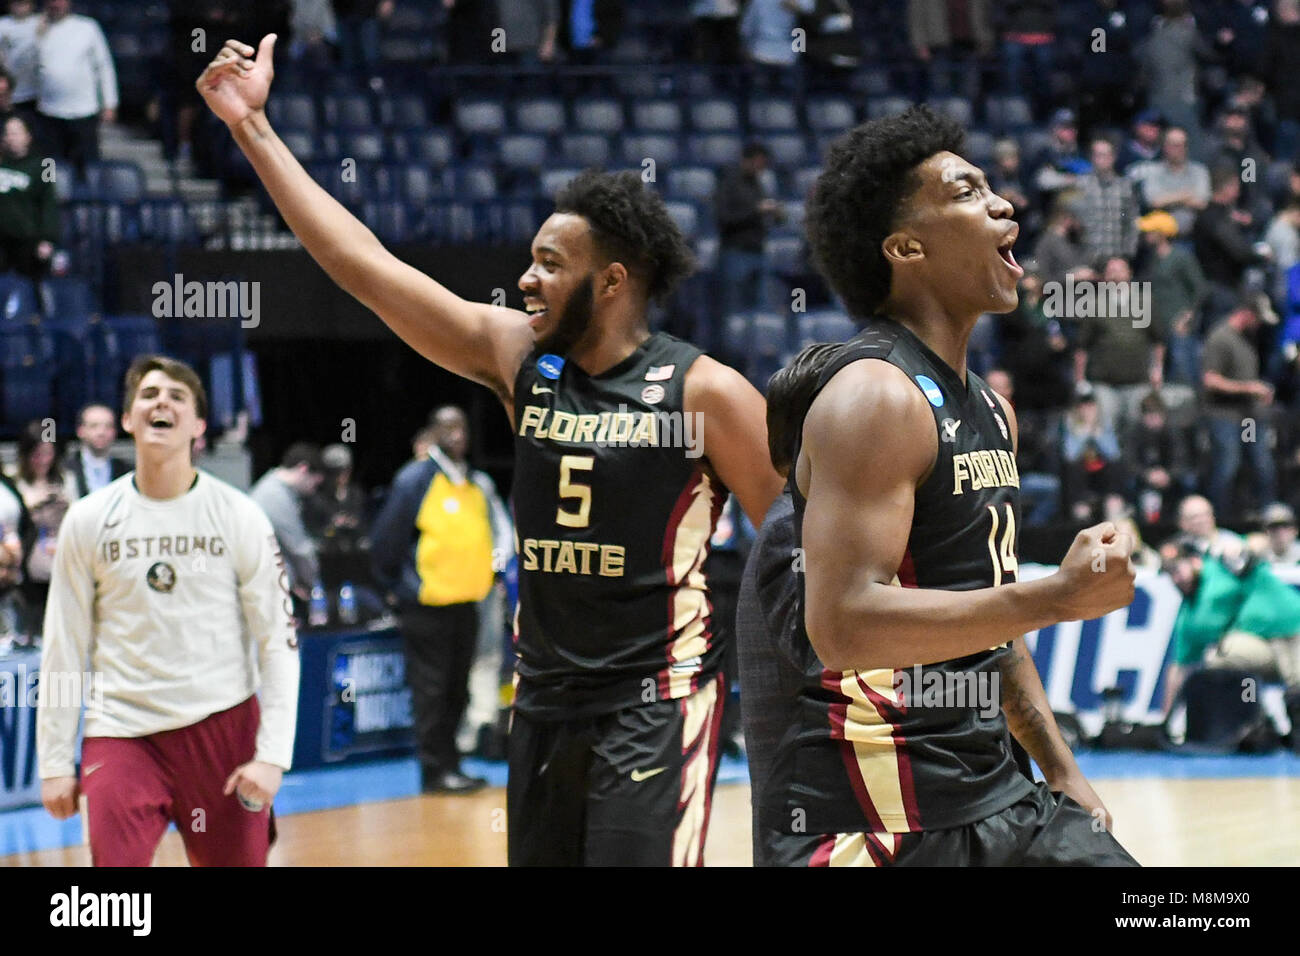 Nashville, Tennessee, USA. 18th Mar, 2018. Florida State Seminoles guards PJ Savoy (5) and Terrance Mann (14) react after the game against the Xavier Musketeers at Bridgestone Arena on March 18, 2018 in Nashville, Tennessee. Credit: FGS Sports/Alamy Live News Stock Photo